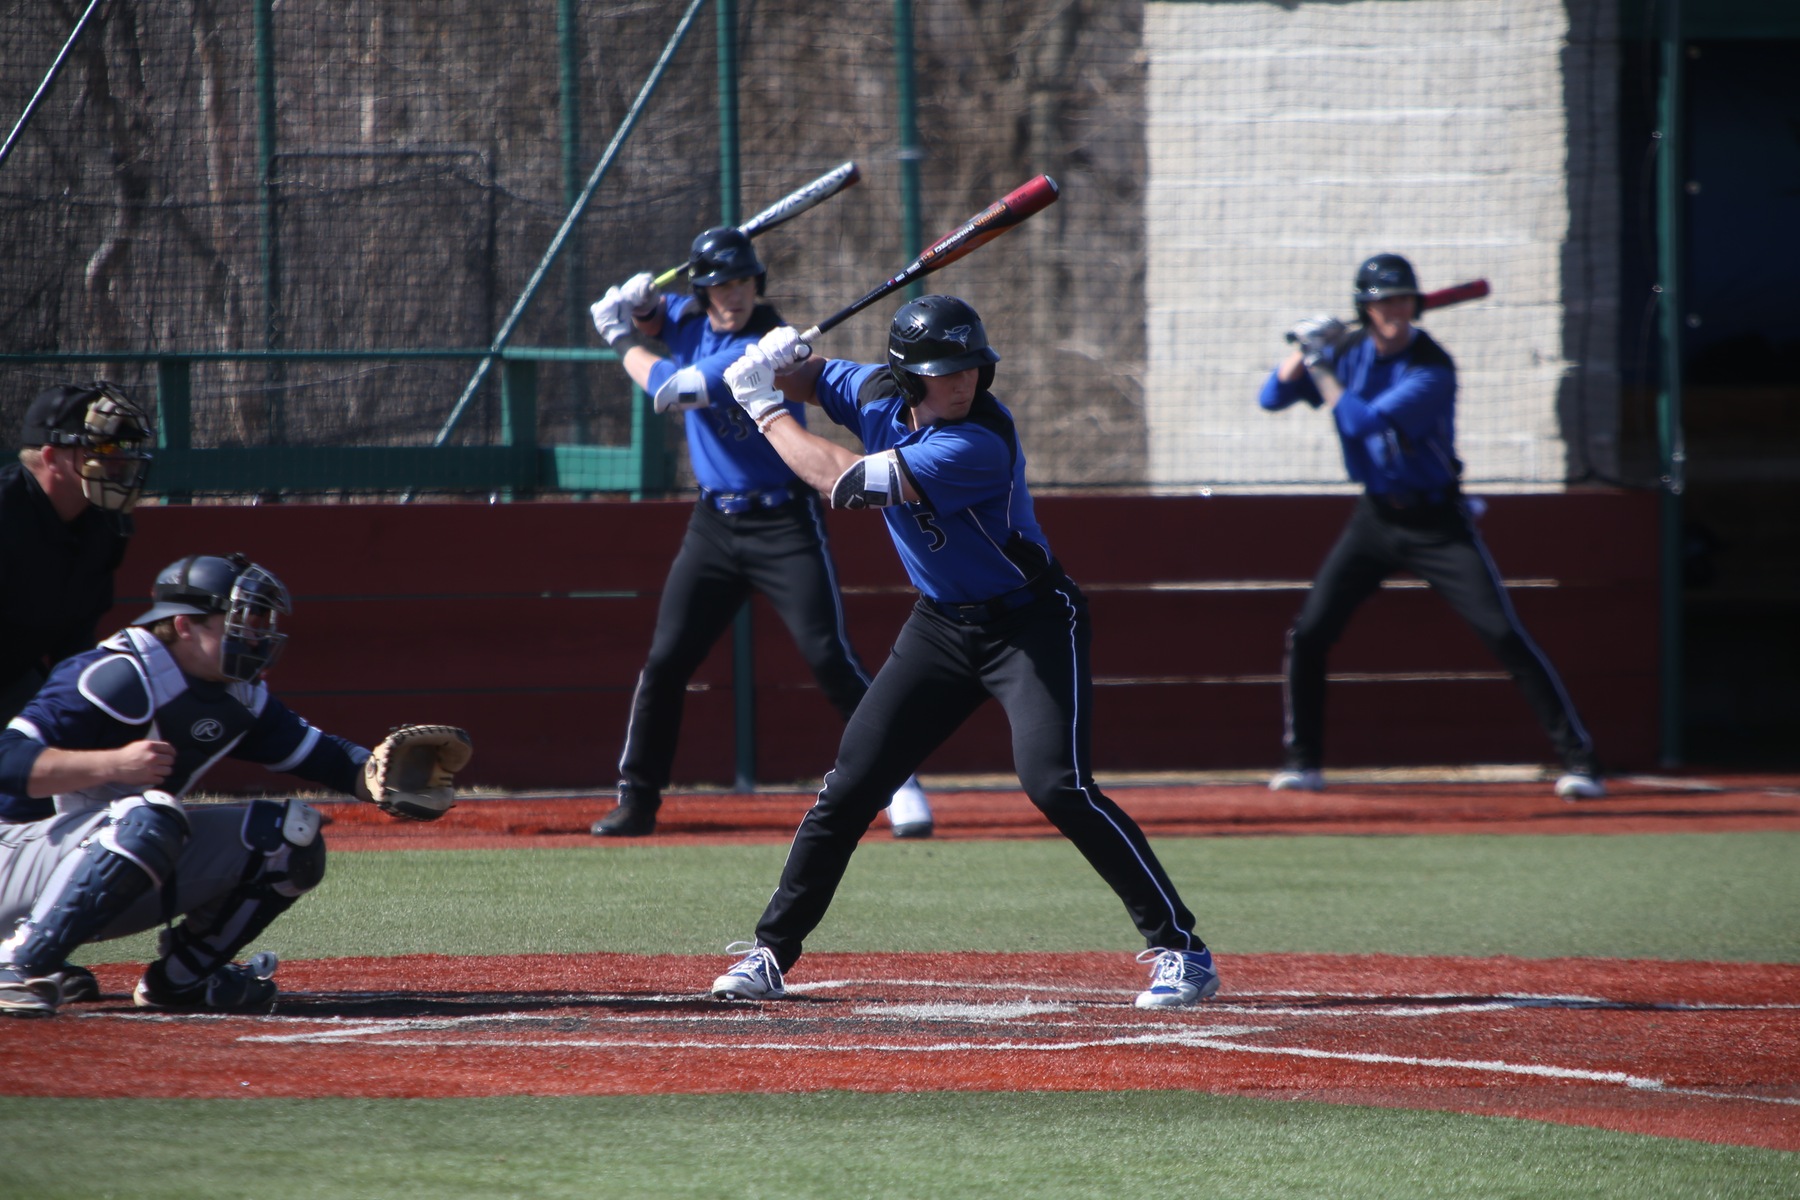 Reivers Back on Track, Sweep DMACC in Midweek DH